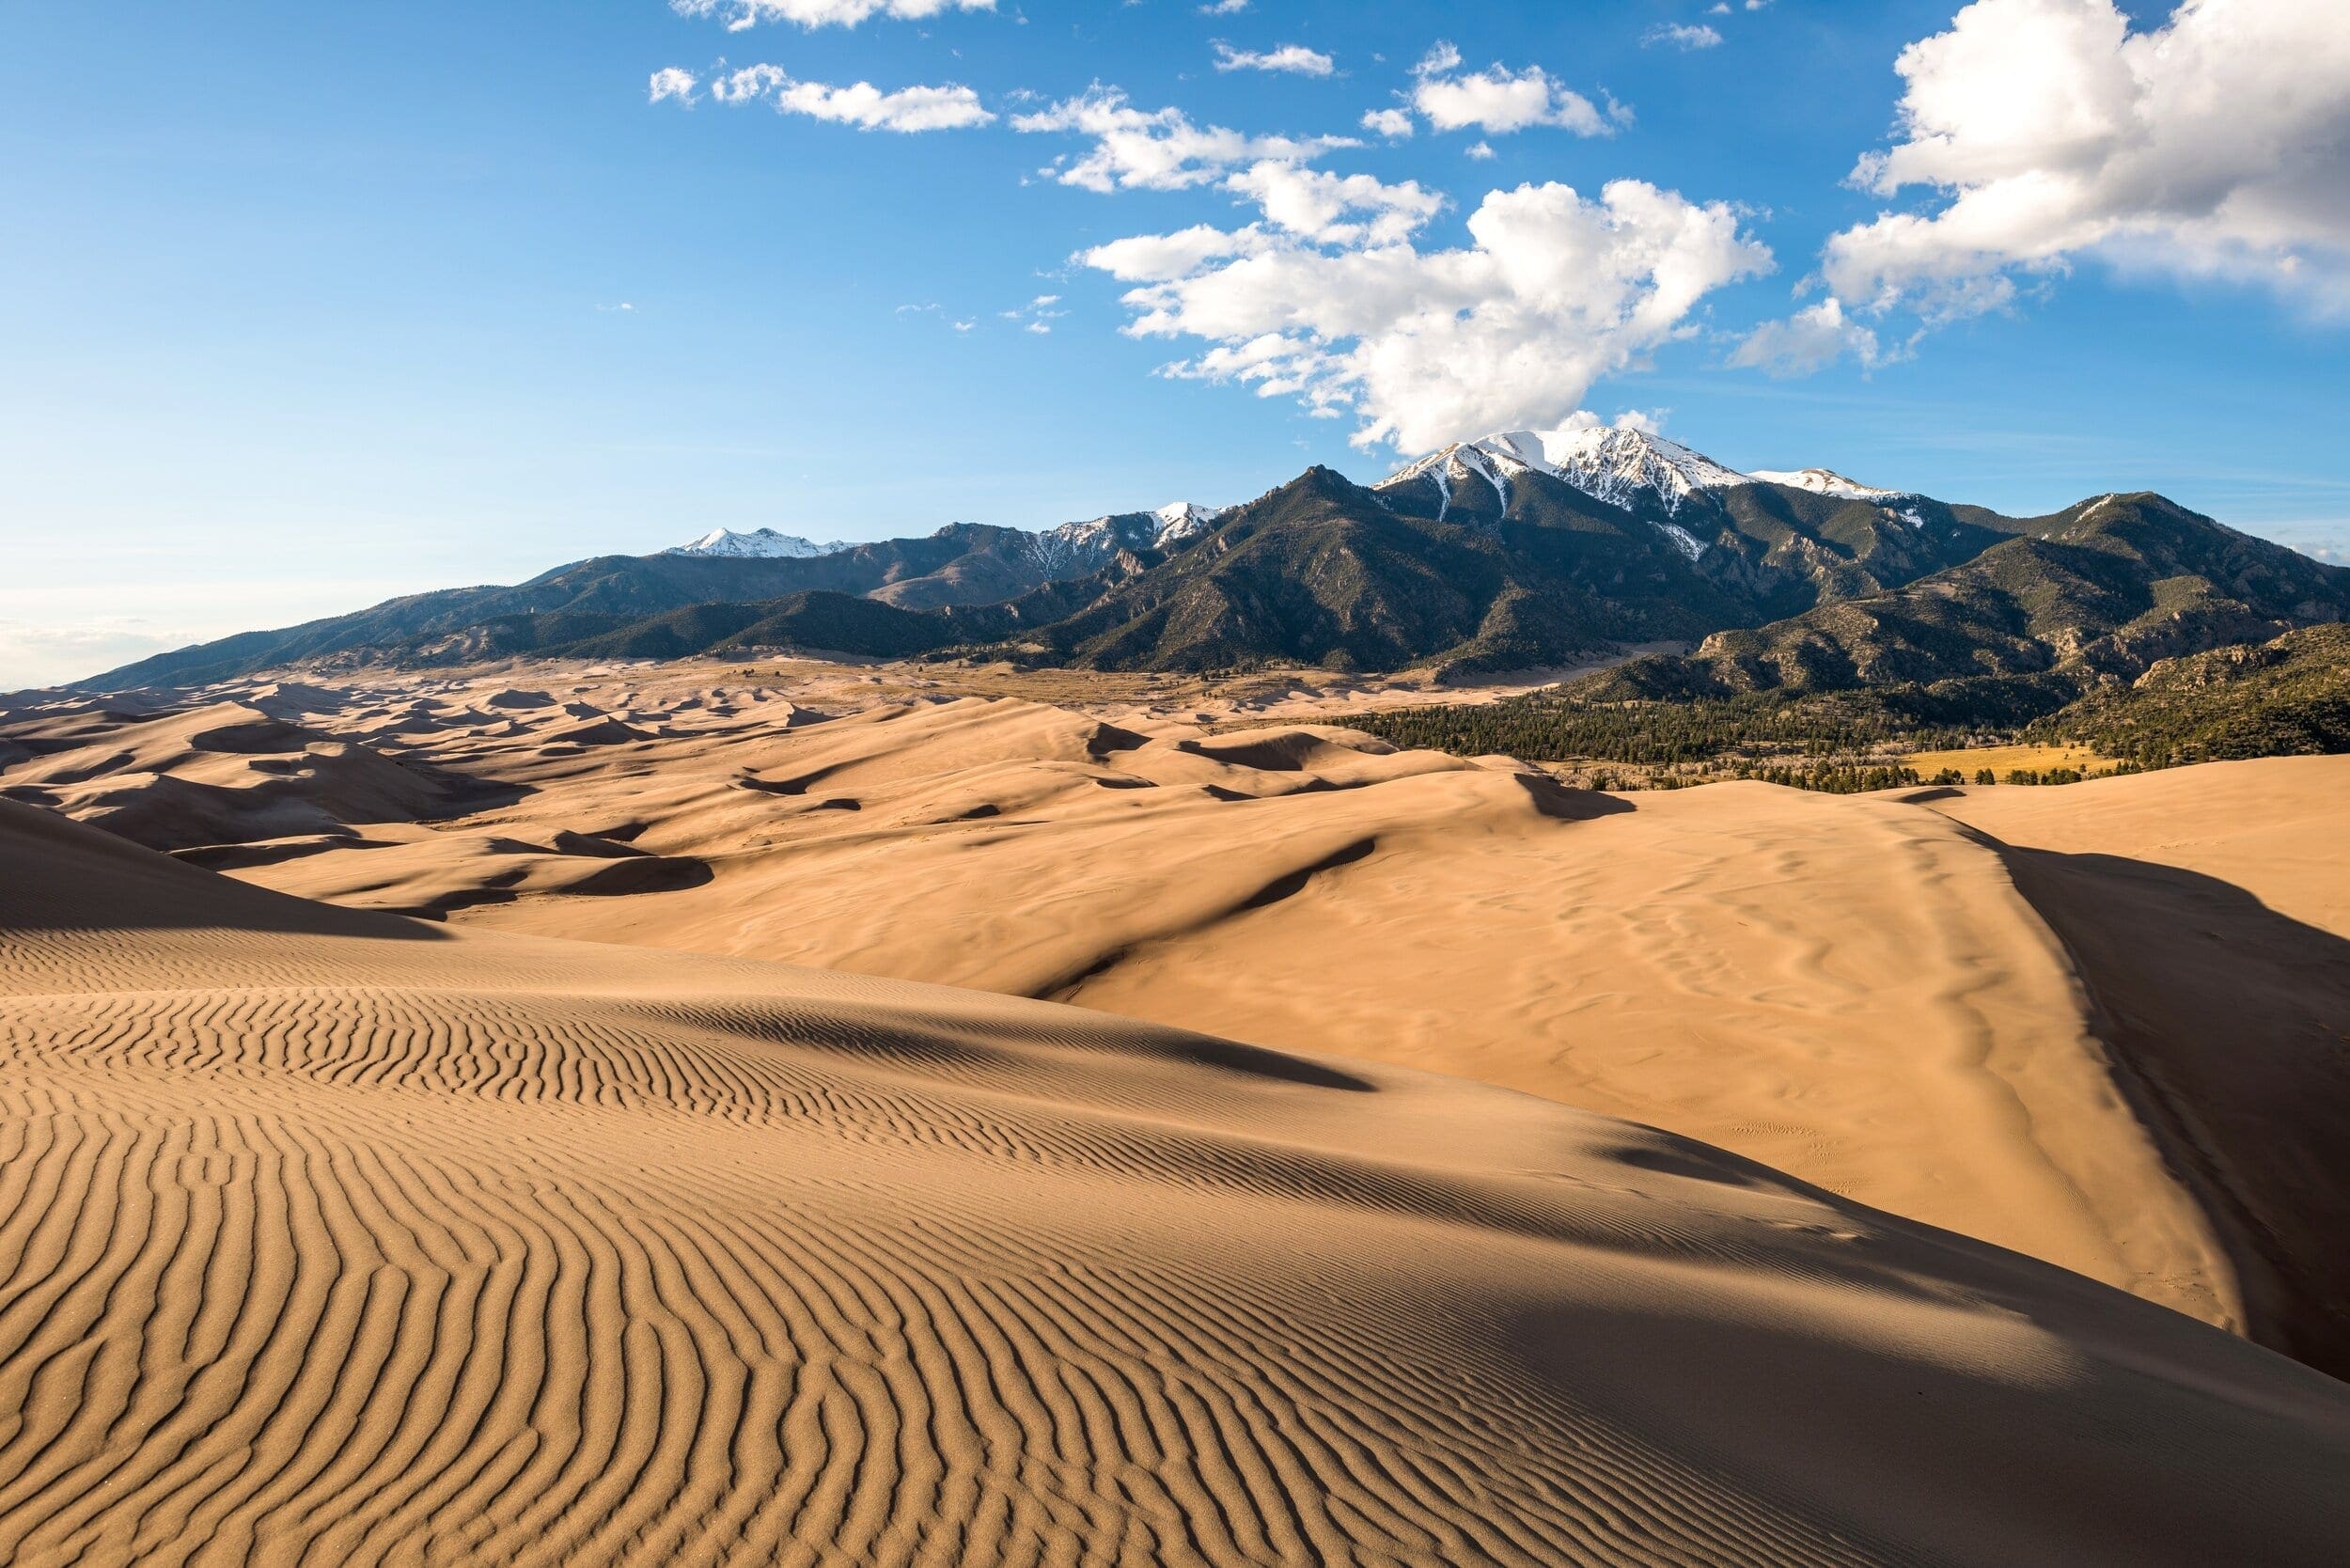 Adventurers Guide To The Great Sand Dunes National Park And Preserve